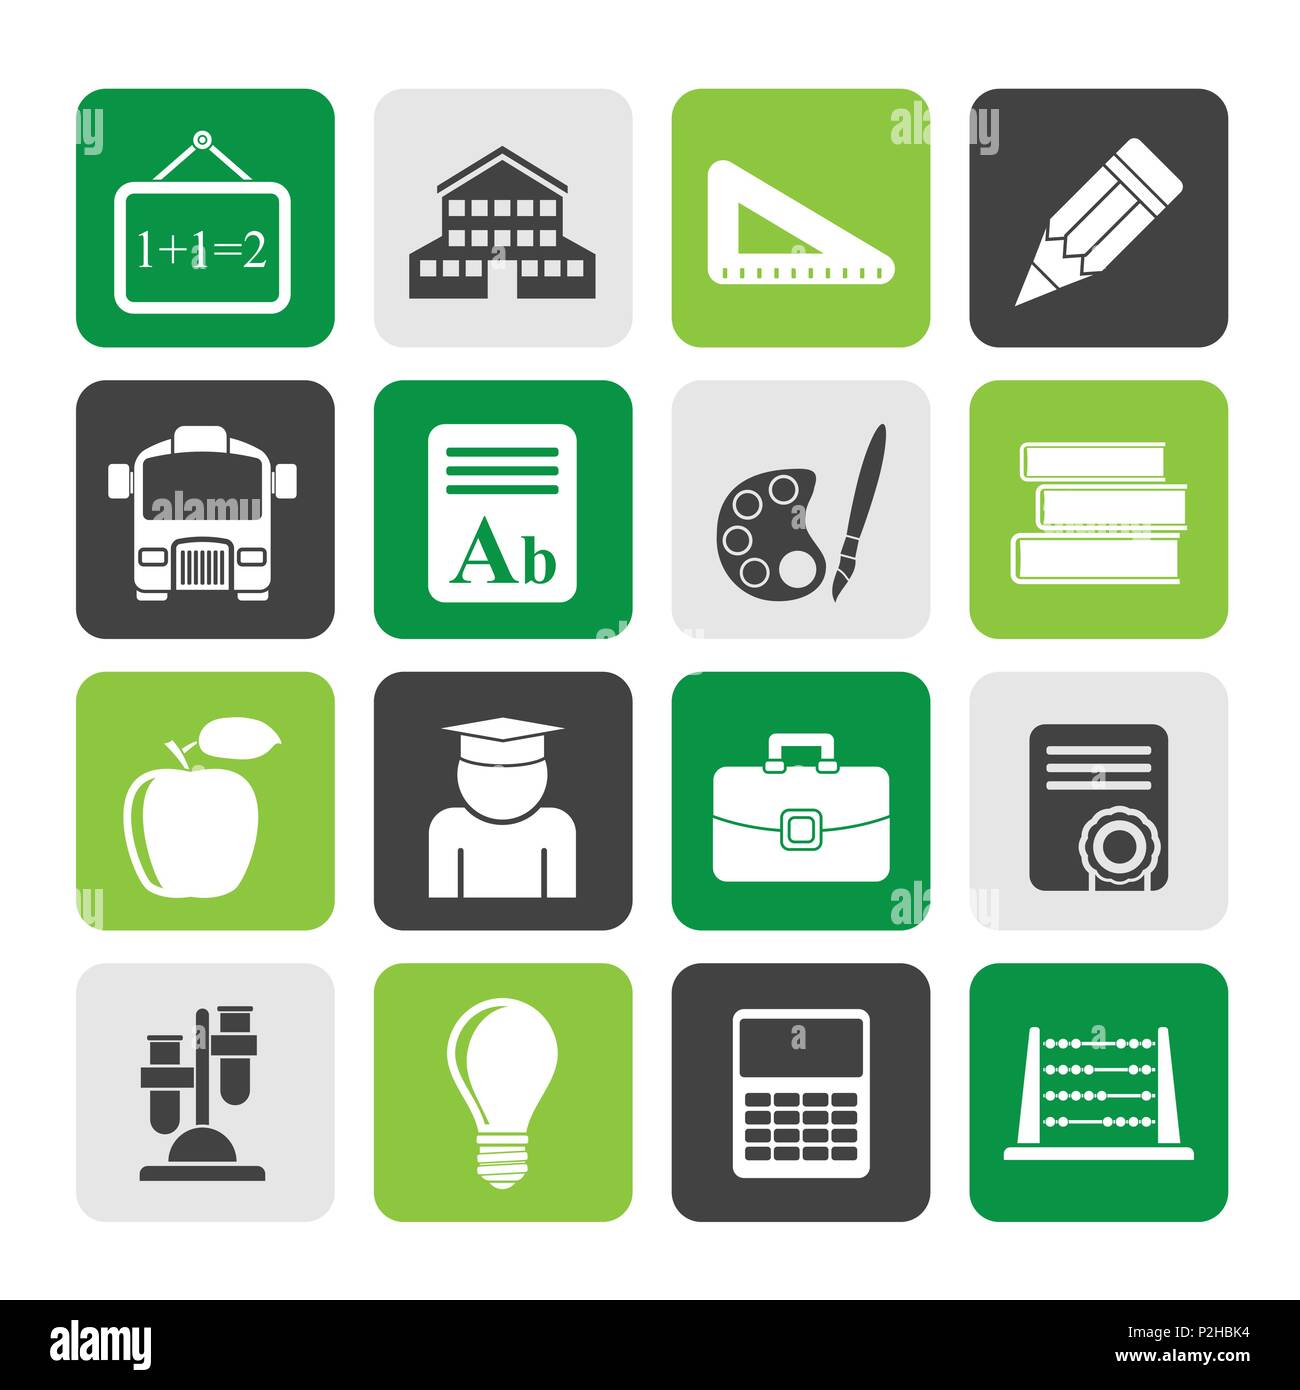 Silhouette school and education icons - vector icon set Stock Vector